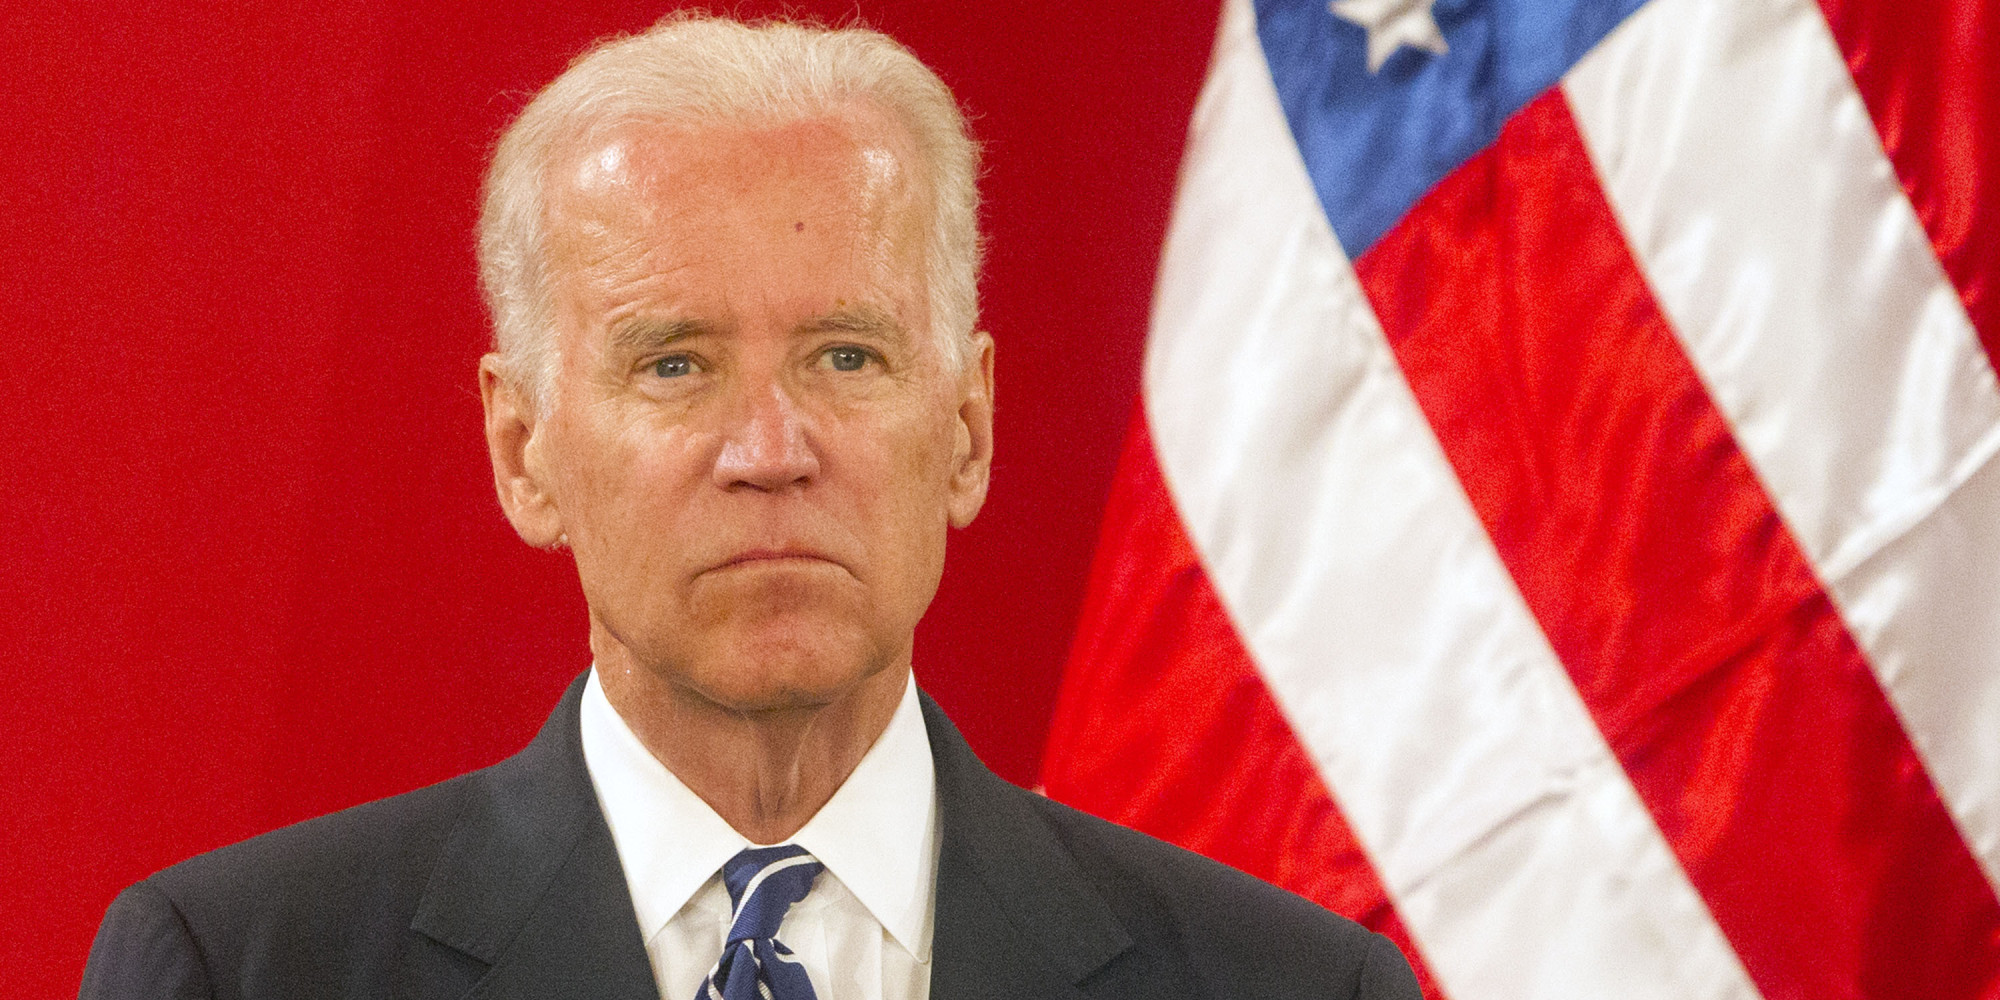 Joe Biden Used to Swim Naked in Front of Embarrassed 